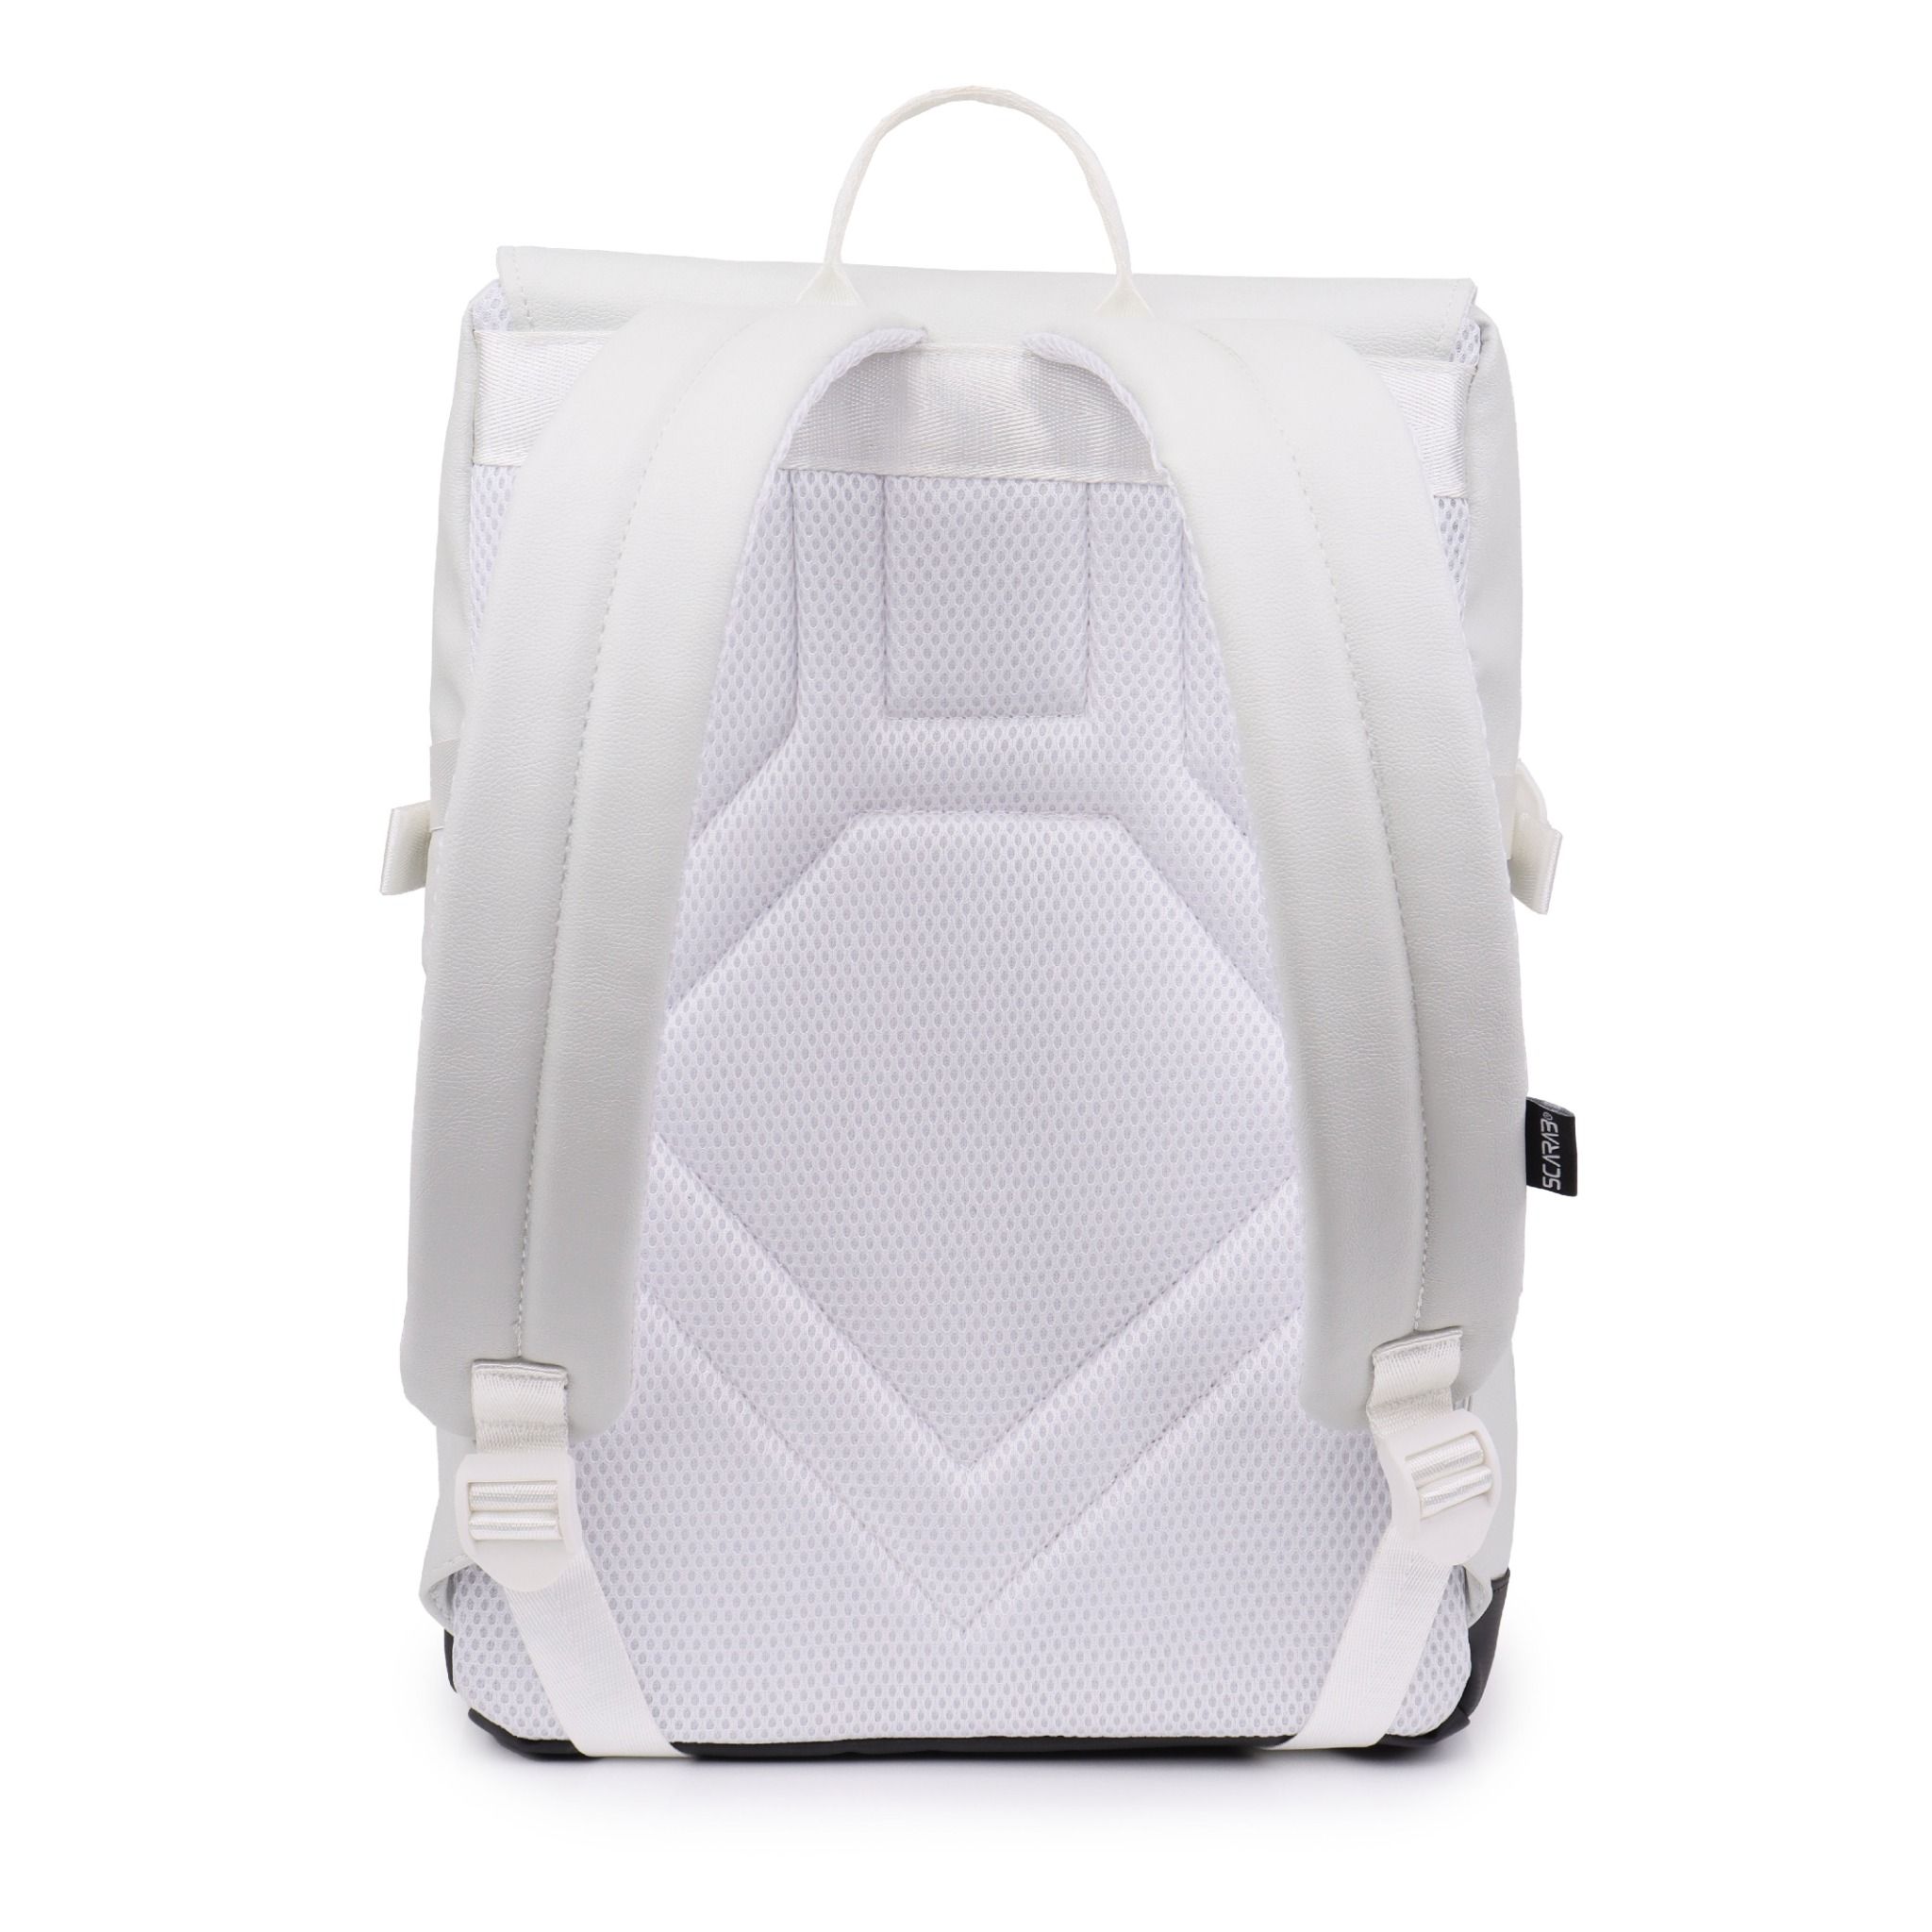  Urban Leather Backpack - Grey 